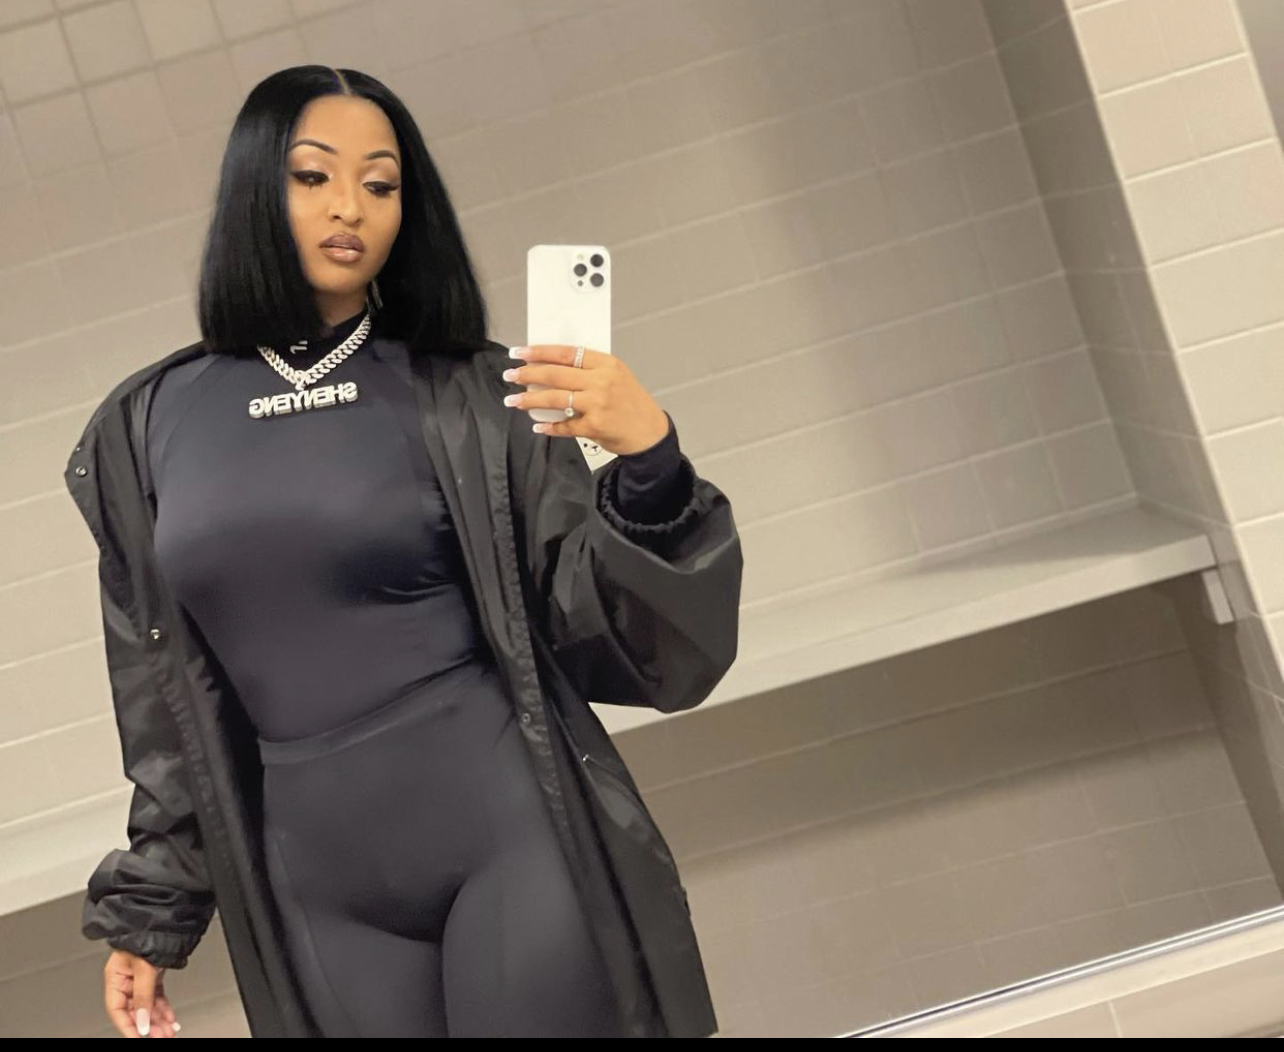 Shenseea makes special appearance at Kanye West’s listening party